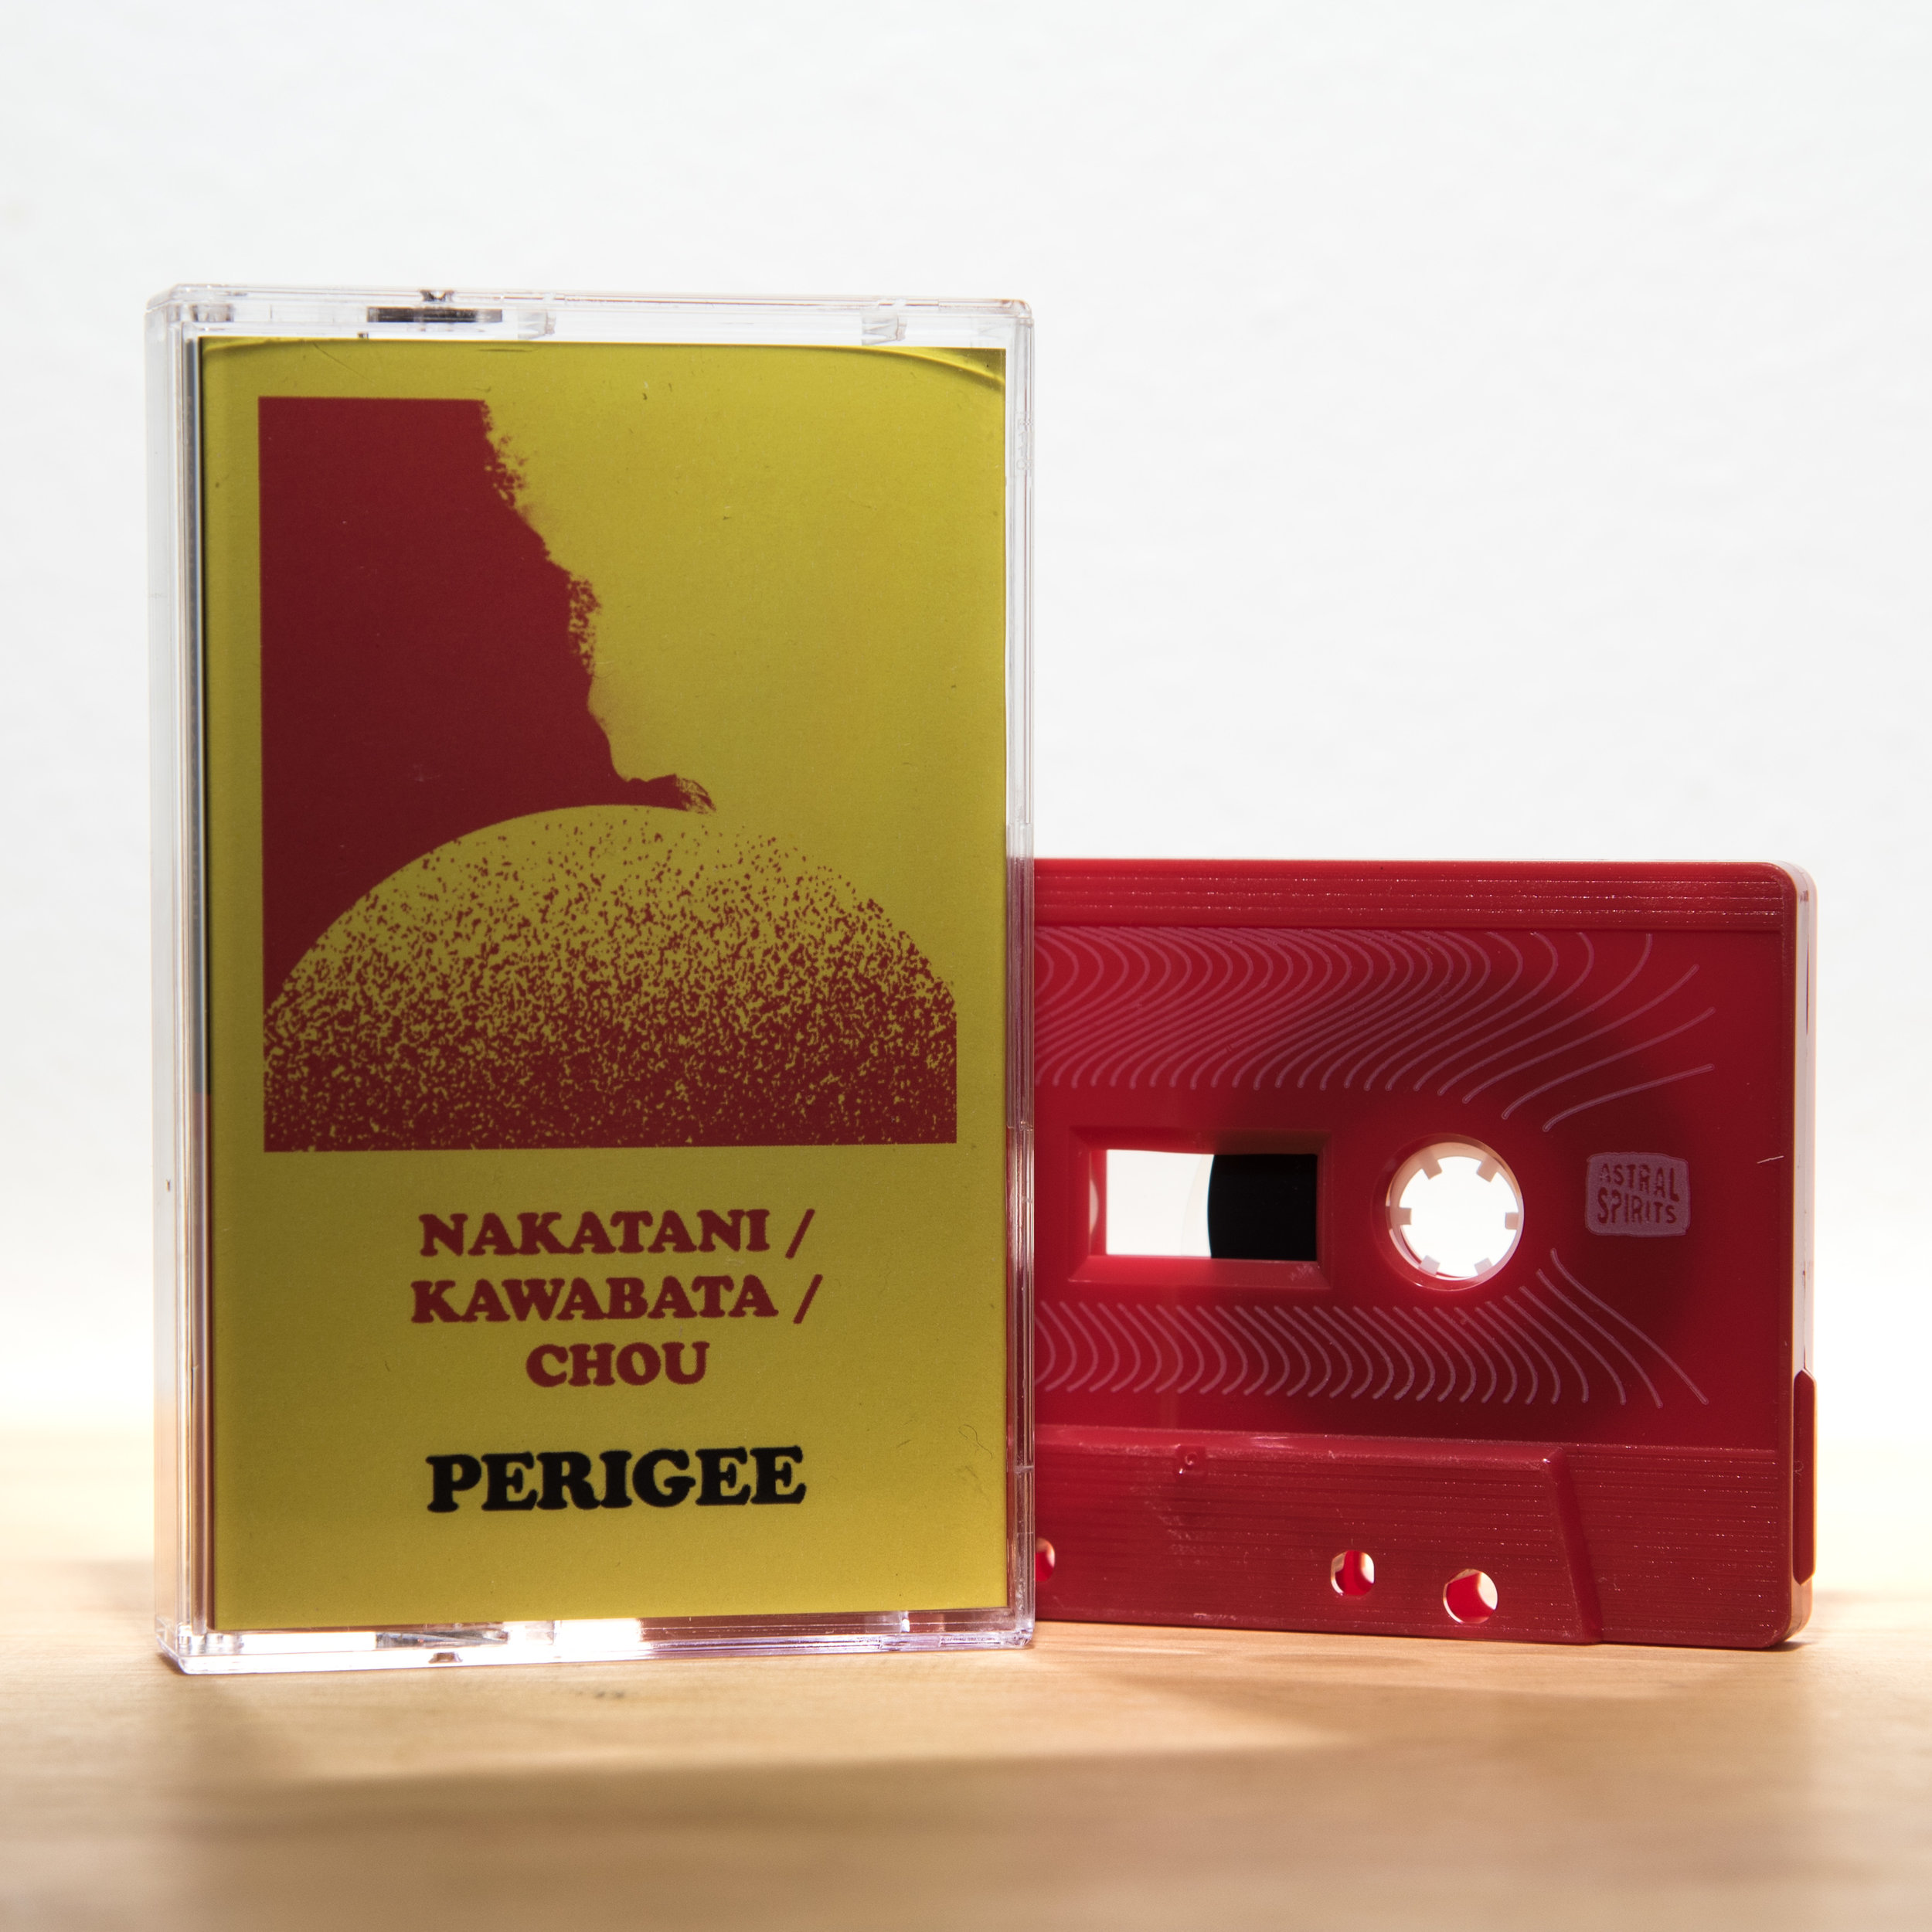 Perigee tape out.jpg